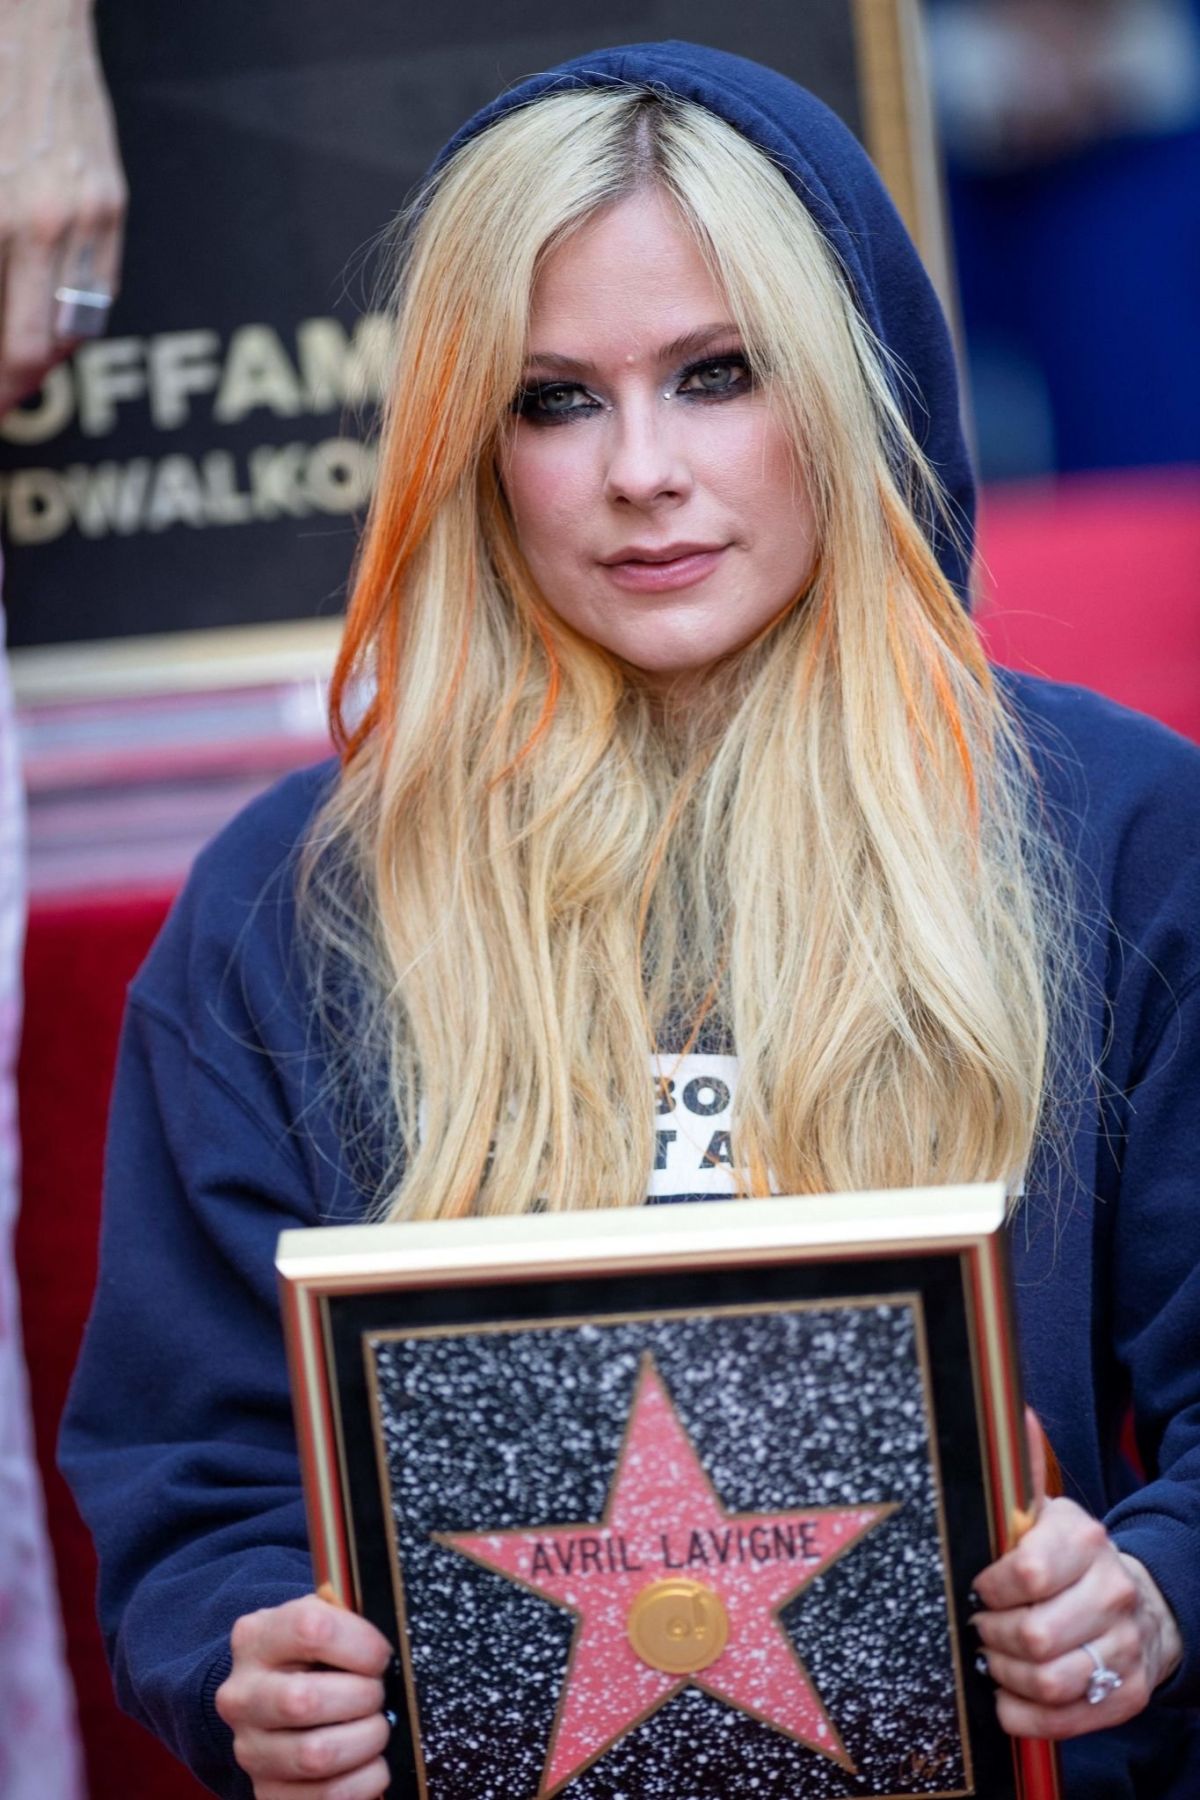 AVRIL LAVIGNE Honored with a Star on Hollywood Walk of Fame 08/31/2022.